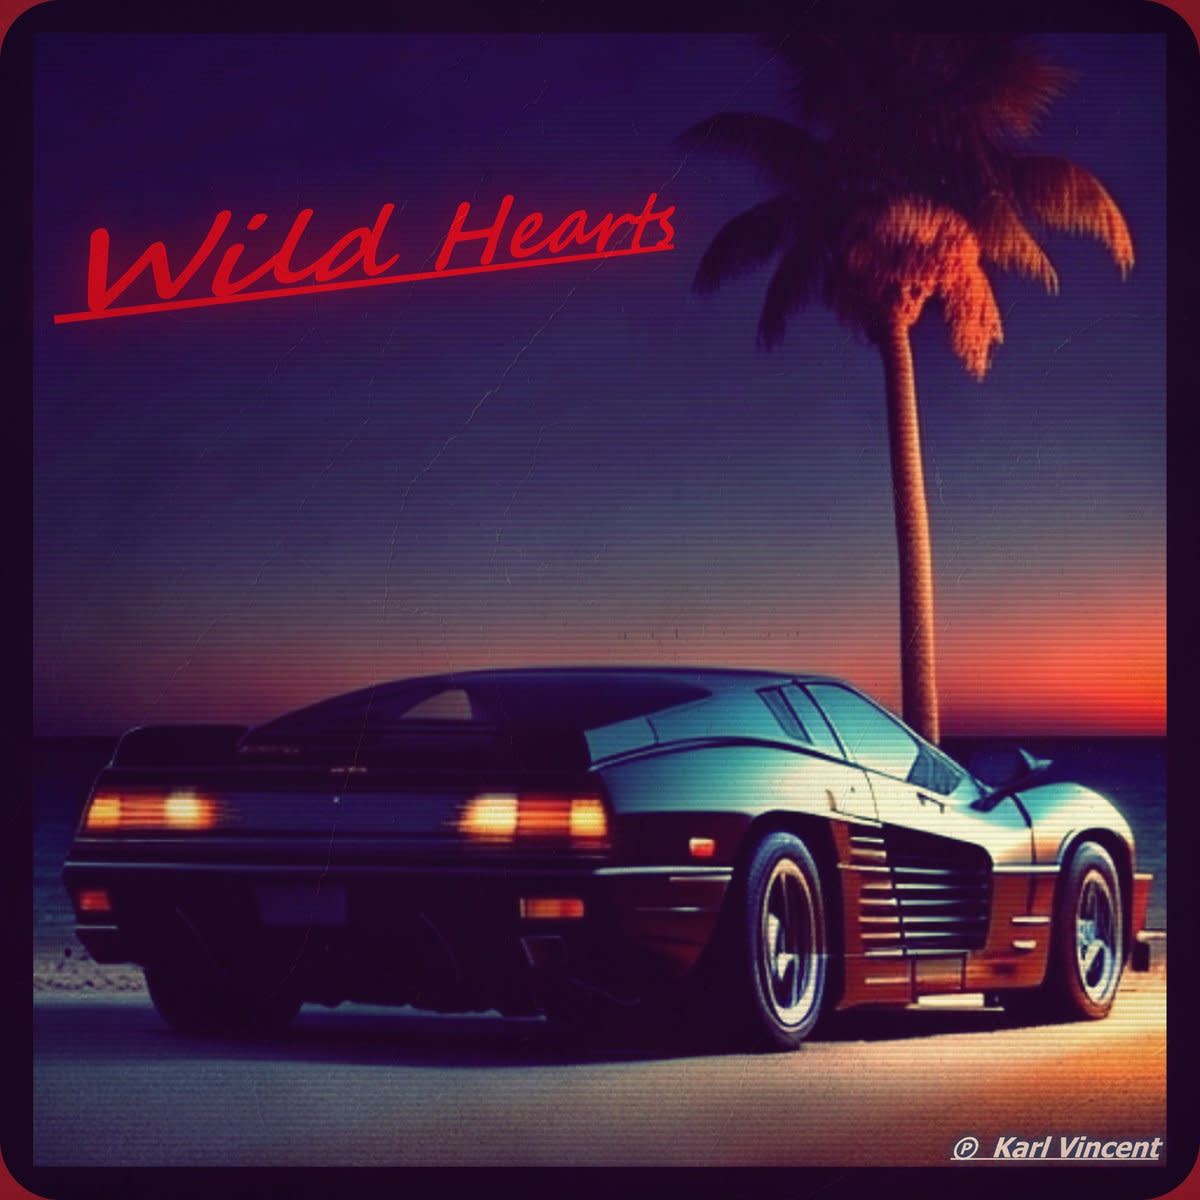 Synth Single Review: “Wild Hearts” by Karl Vincent